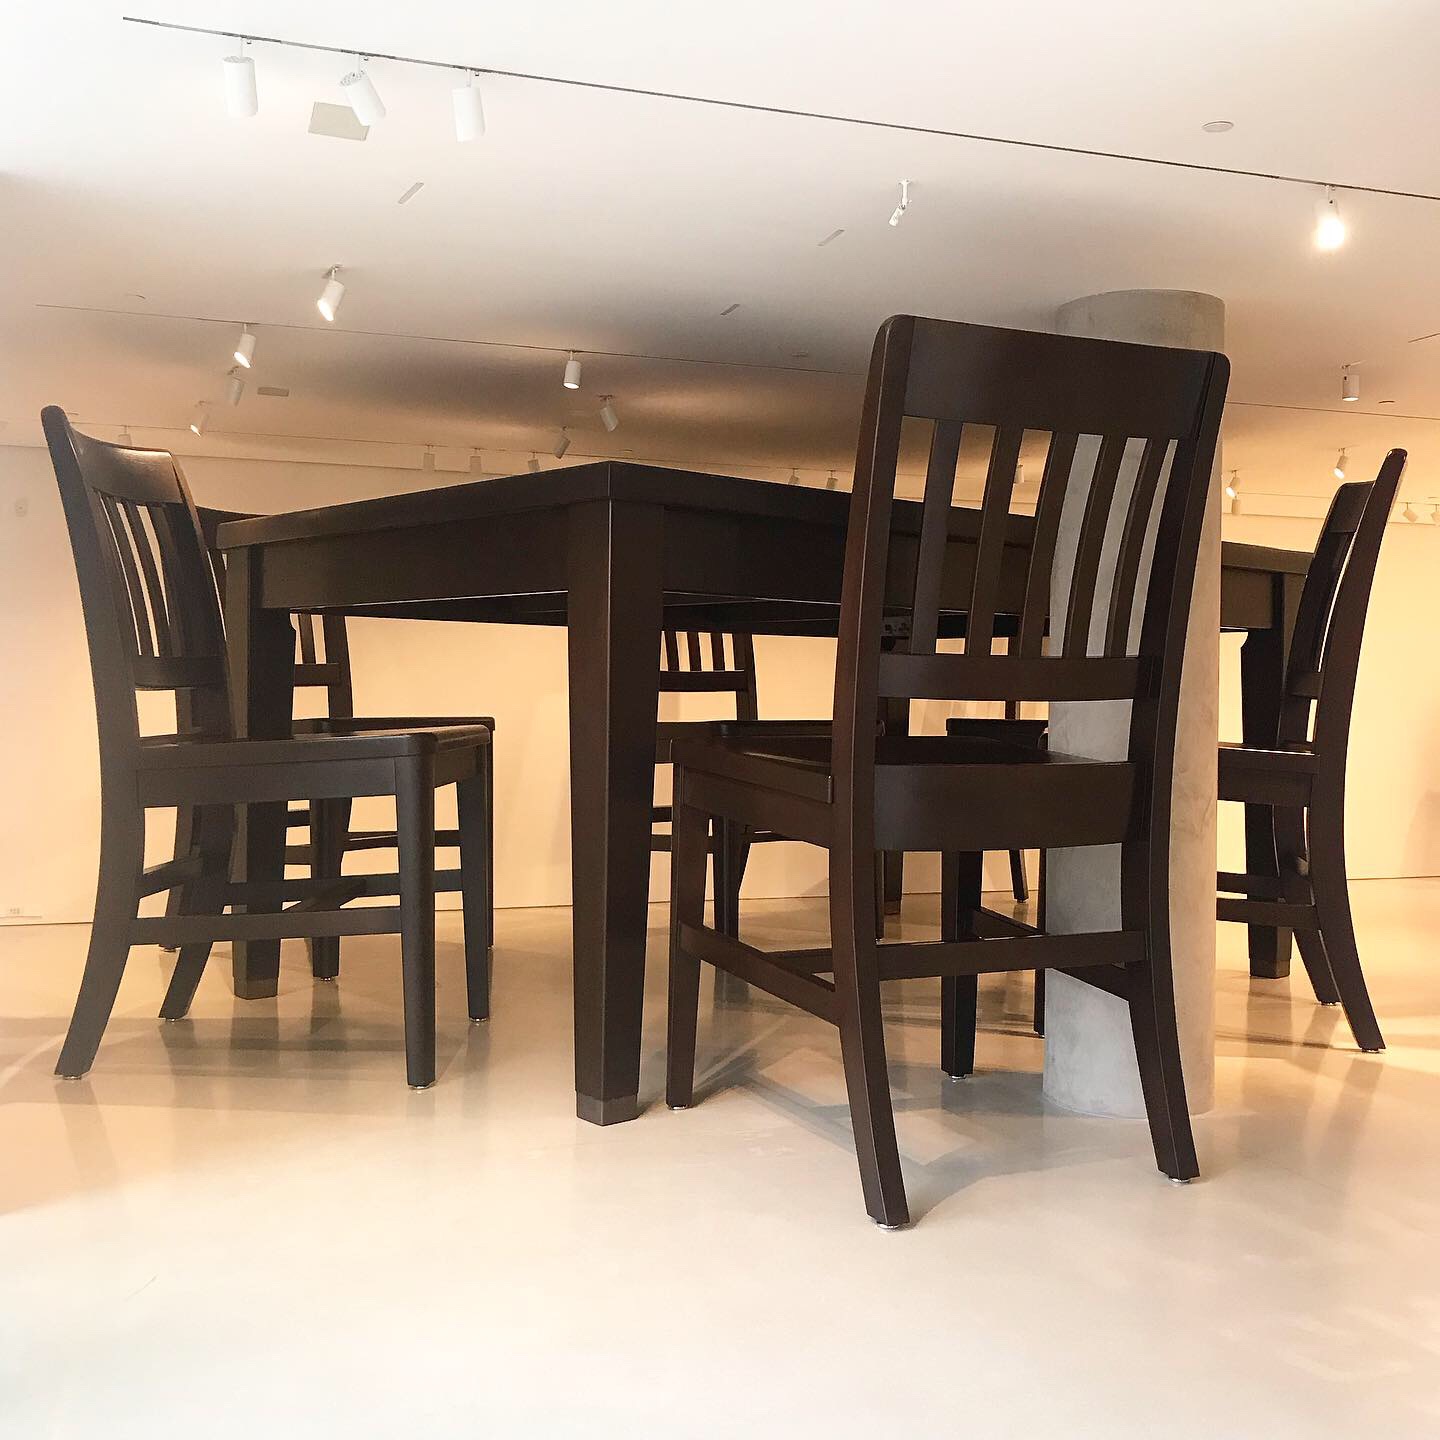 1906-FA-Robert_Therrien-Table_Six_Chairs